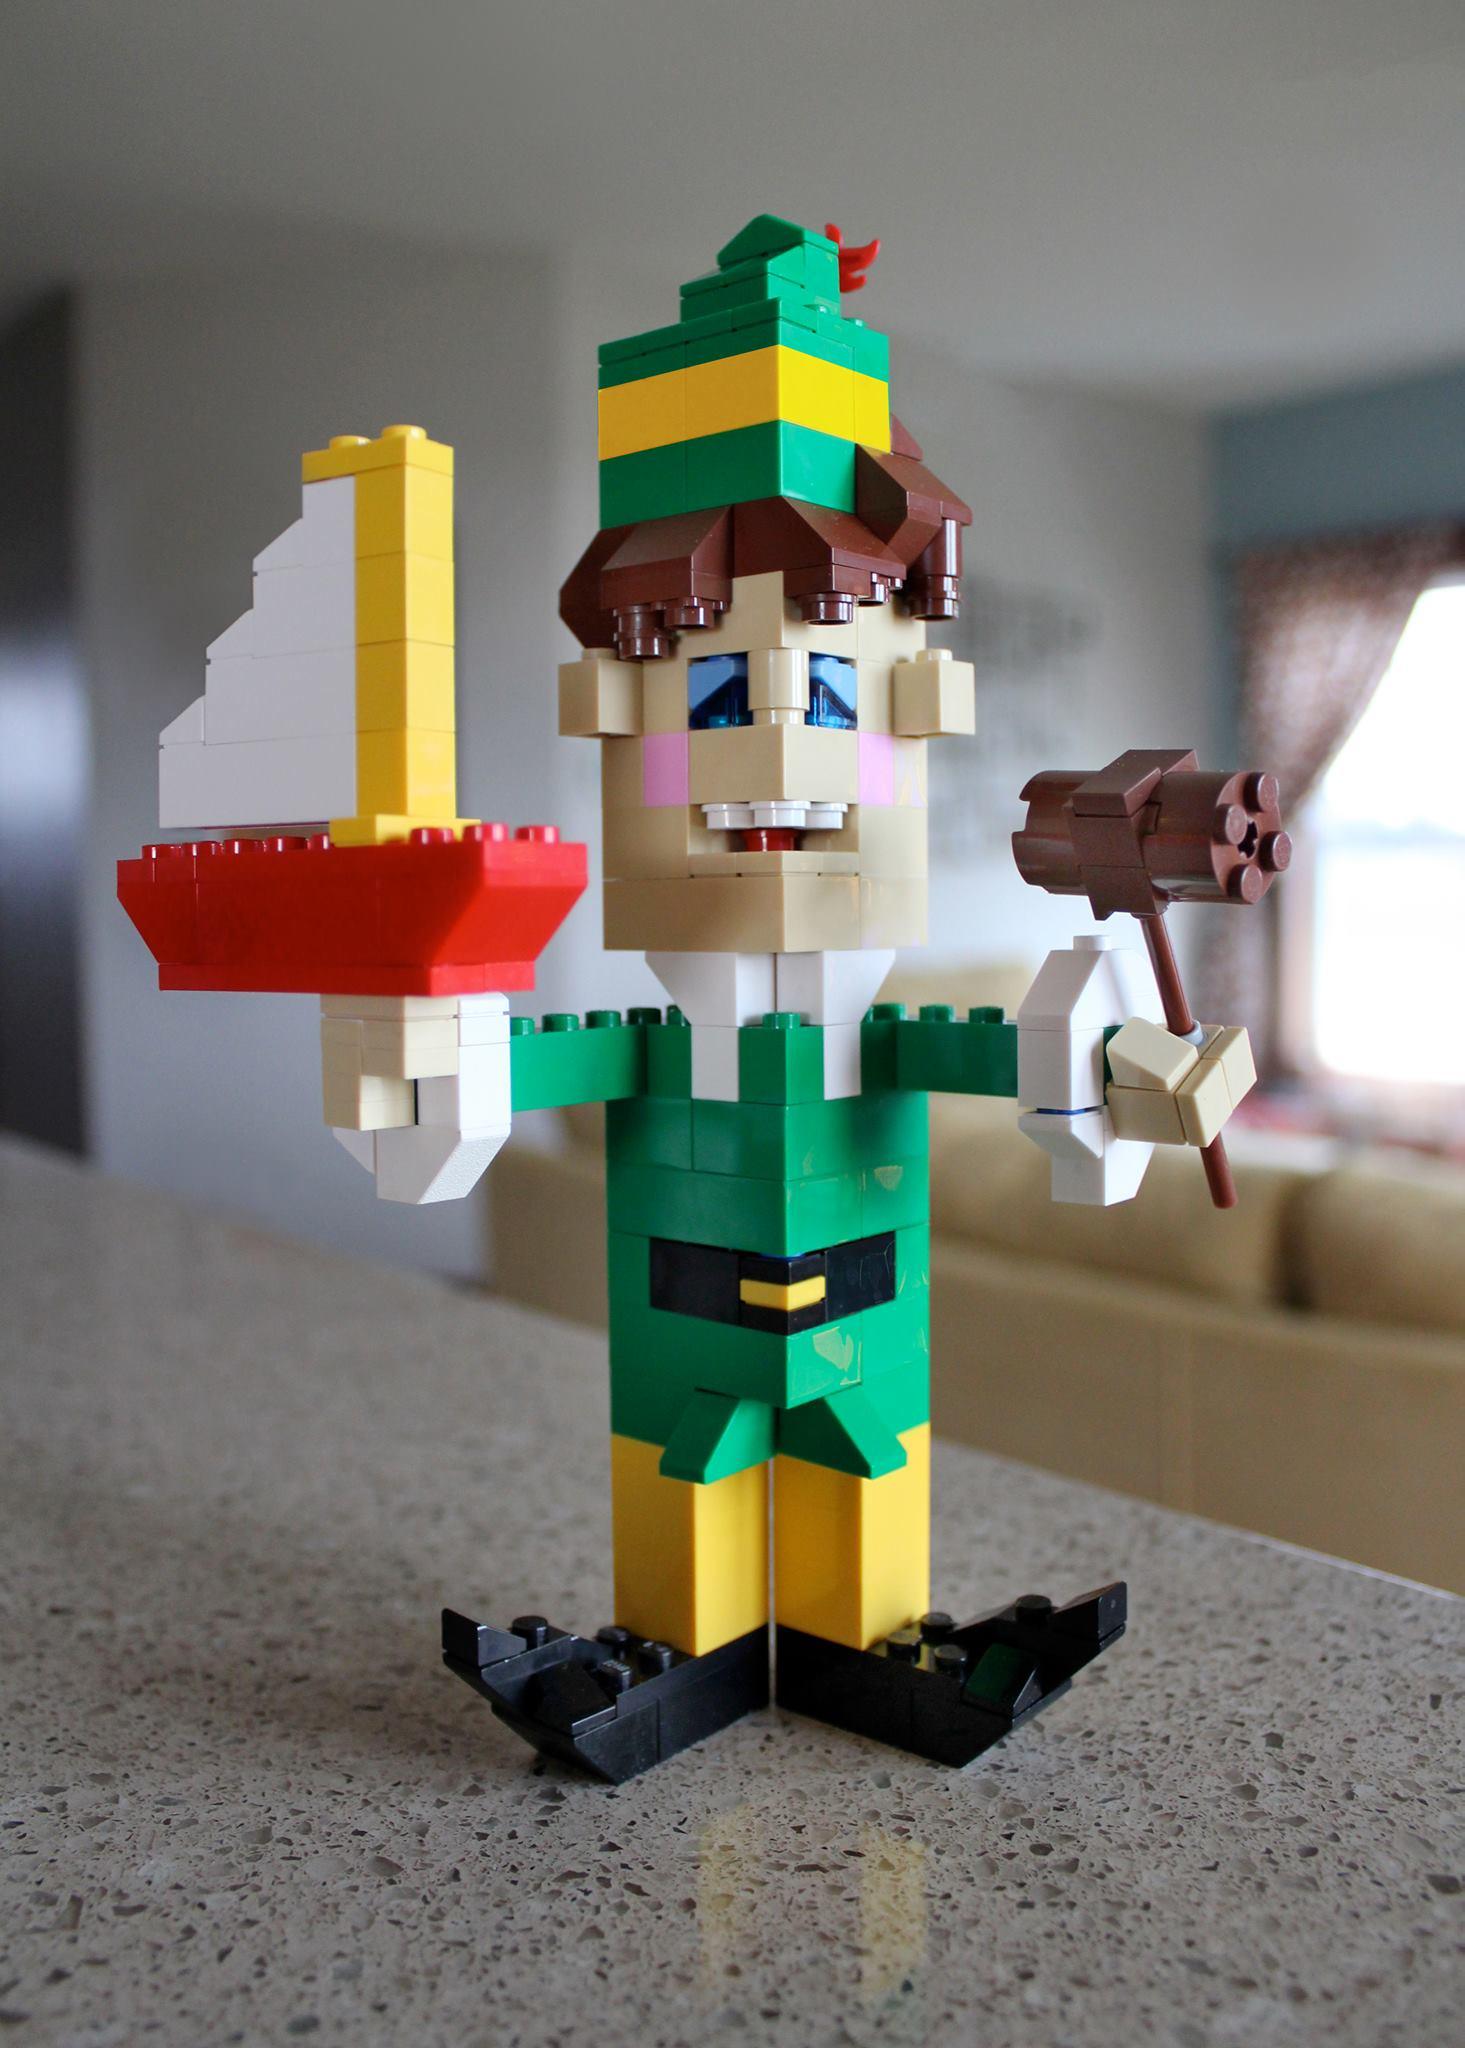 Greg Dietzenbach on I made a LEGO Buddy the Elf that think would make Buddy the Elf proud.@LEGO_Group http://t.co/4Gbnpu1hQ9" / Twitter